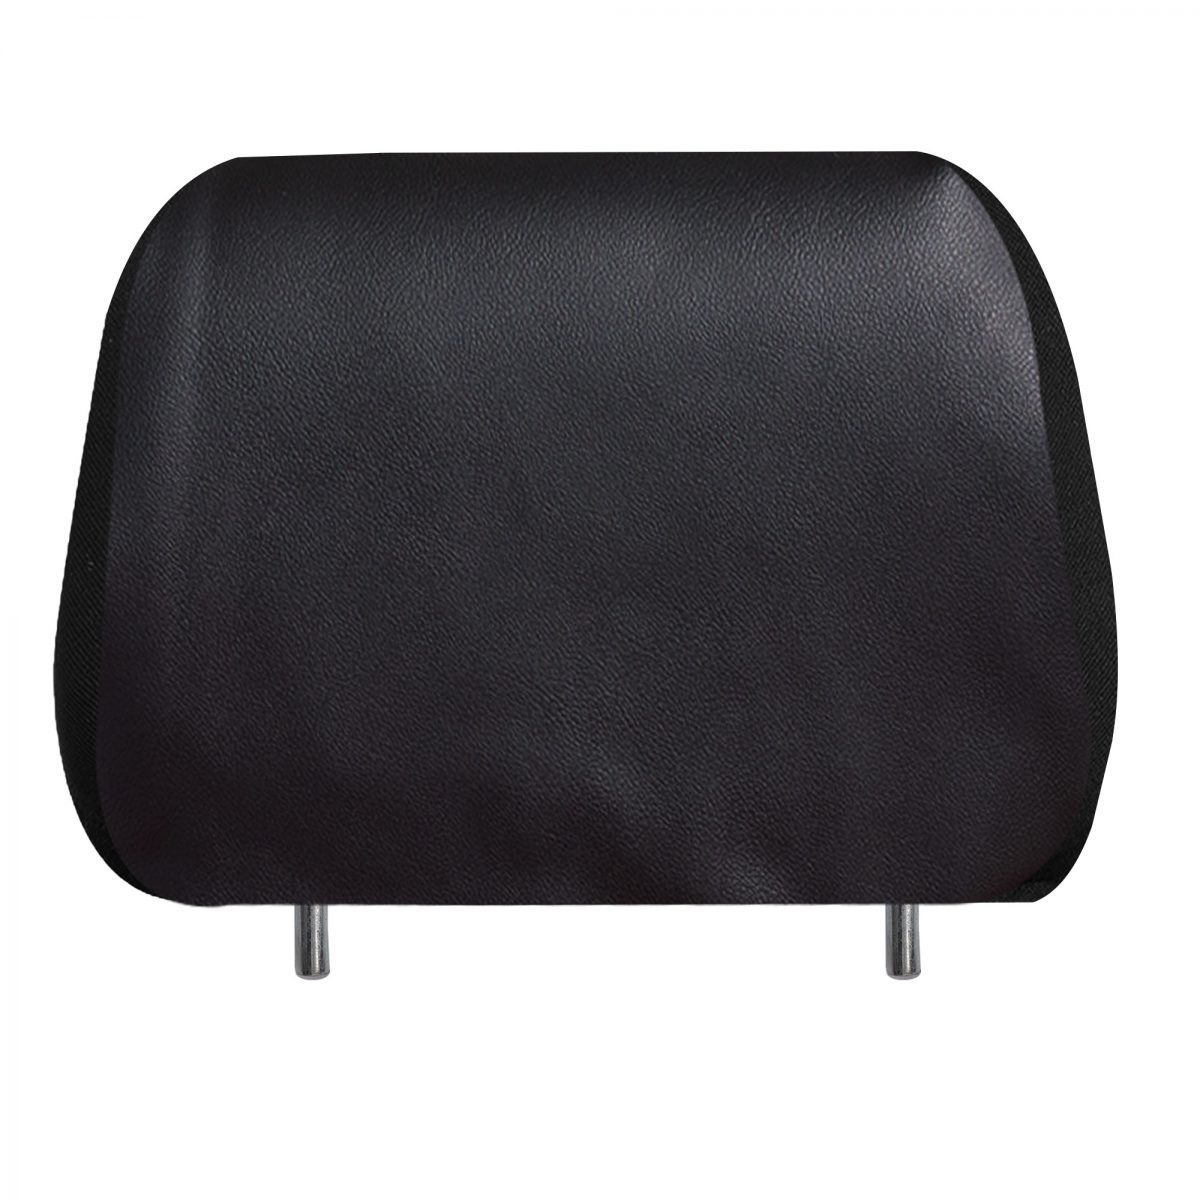 Car Seat Headrest Cover in Faux Leather Black